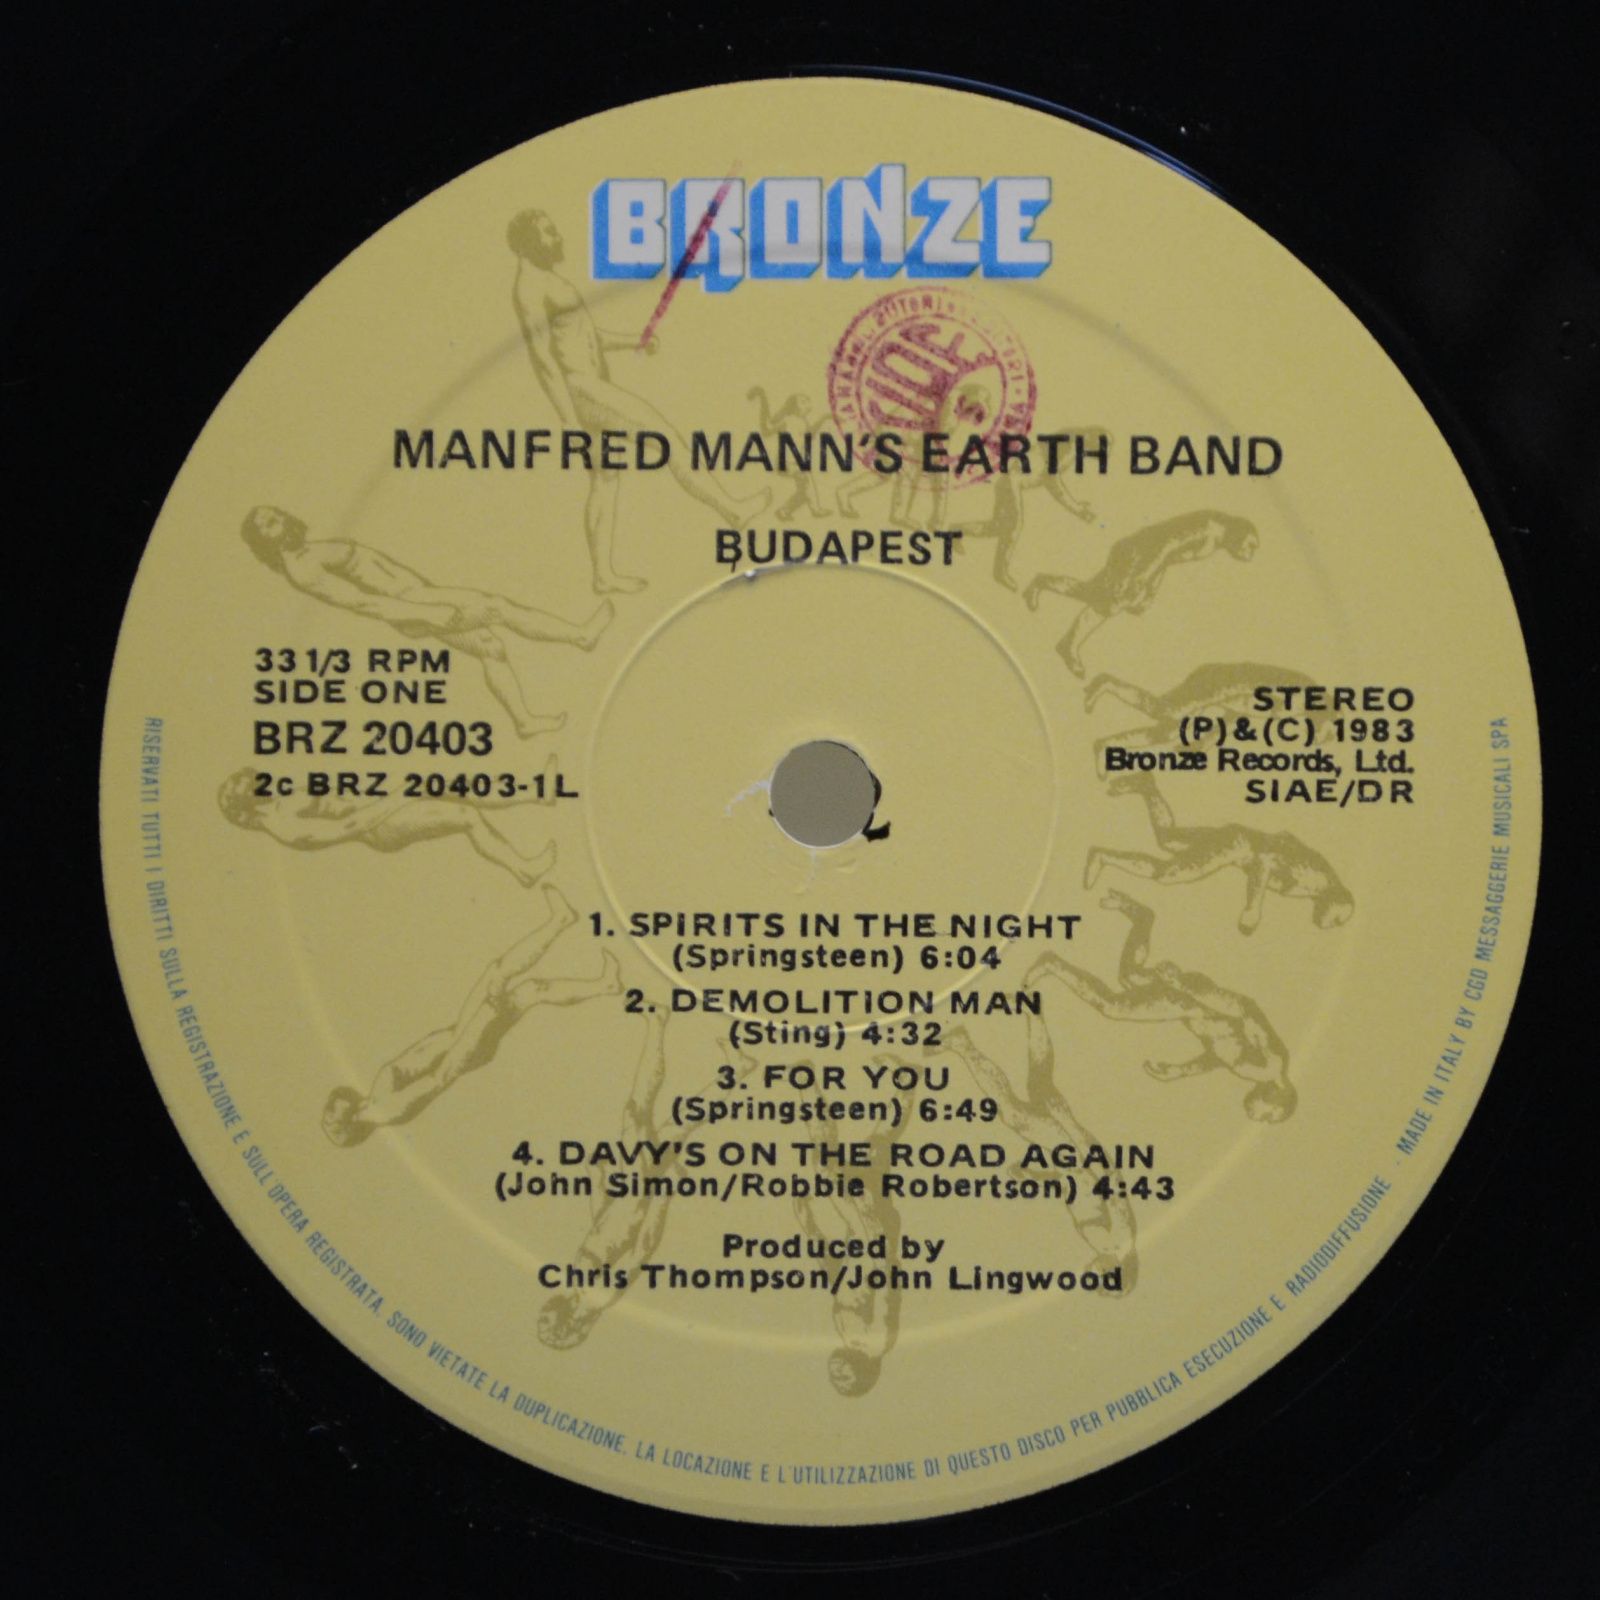 Manfred Mann's Earth Band — Budapest (Live), 1984